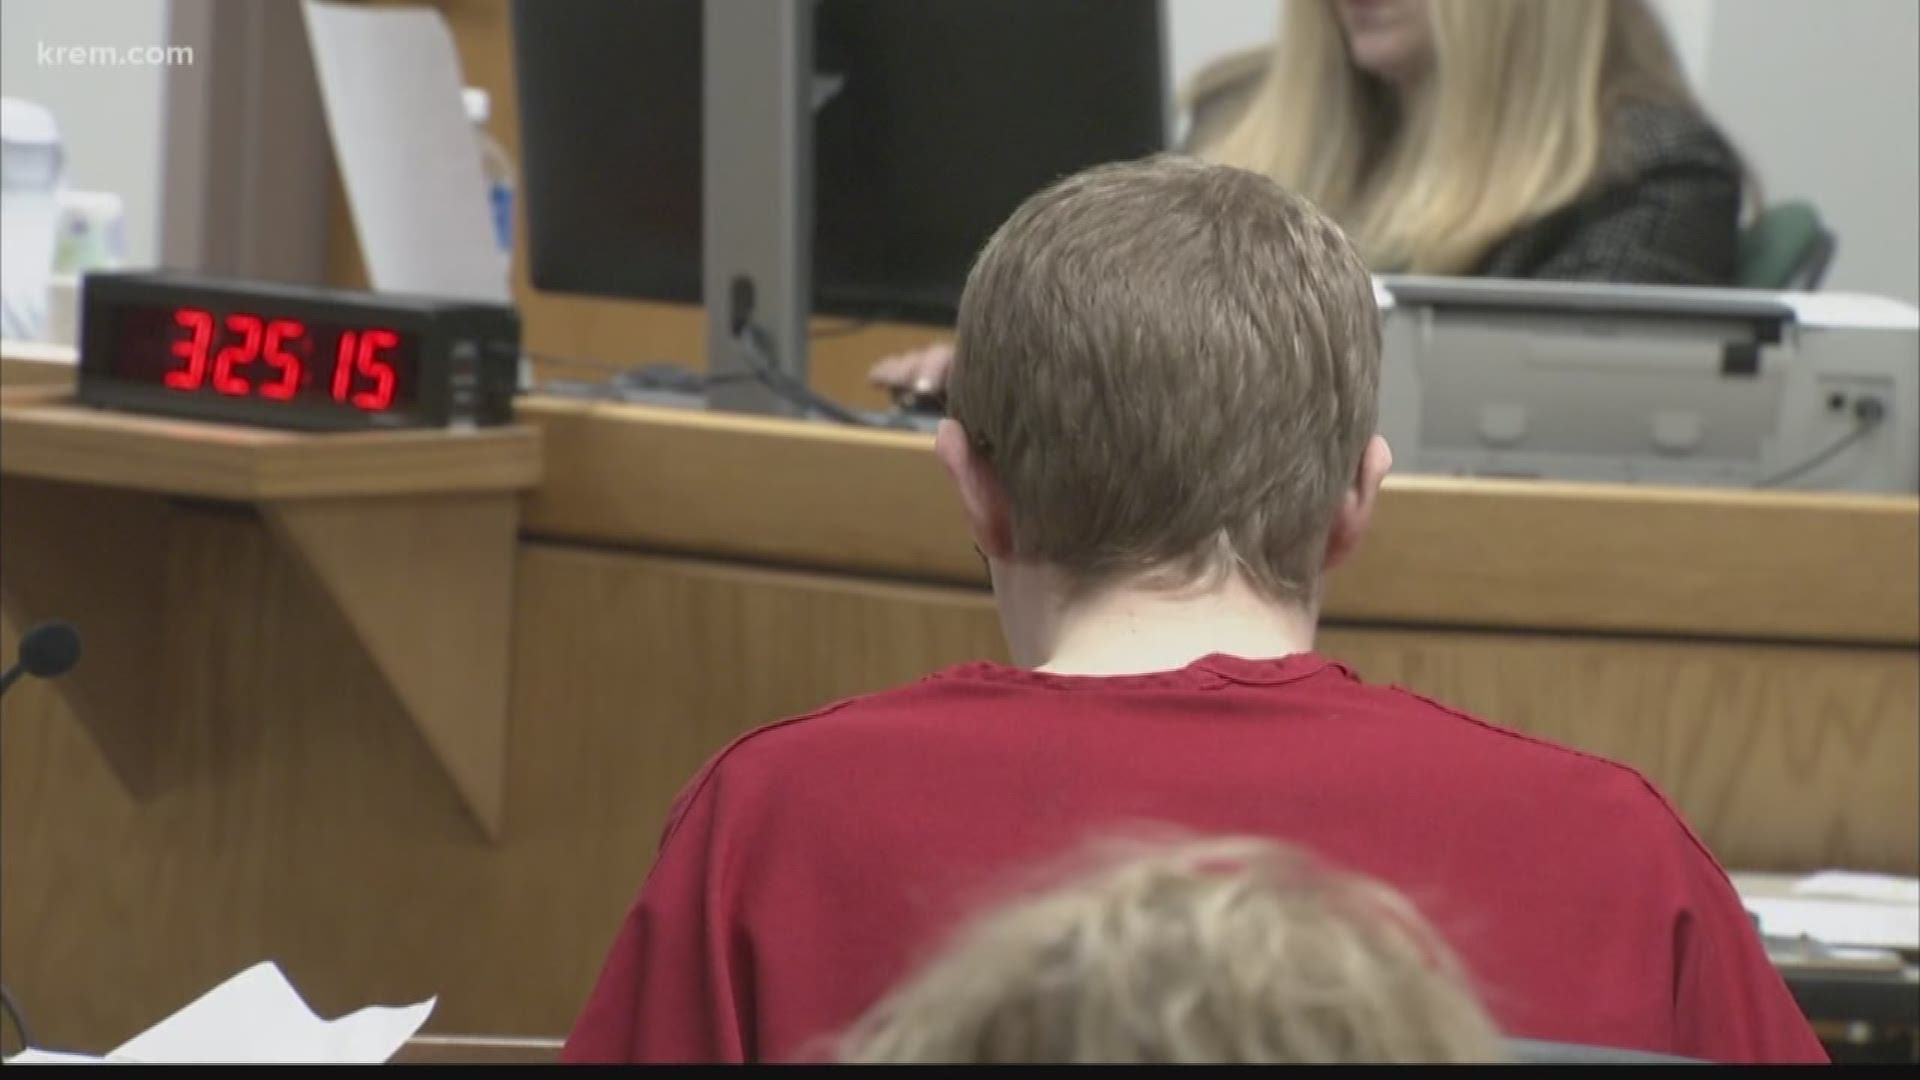 KREM 2's Amanda Roley was in the courtroom for the sentencing.